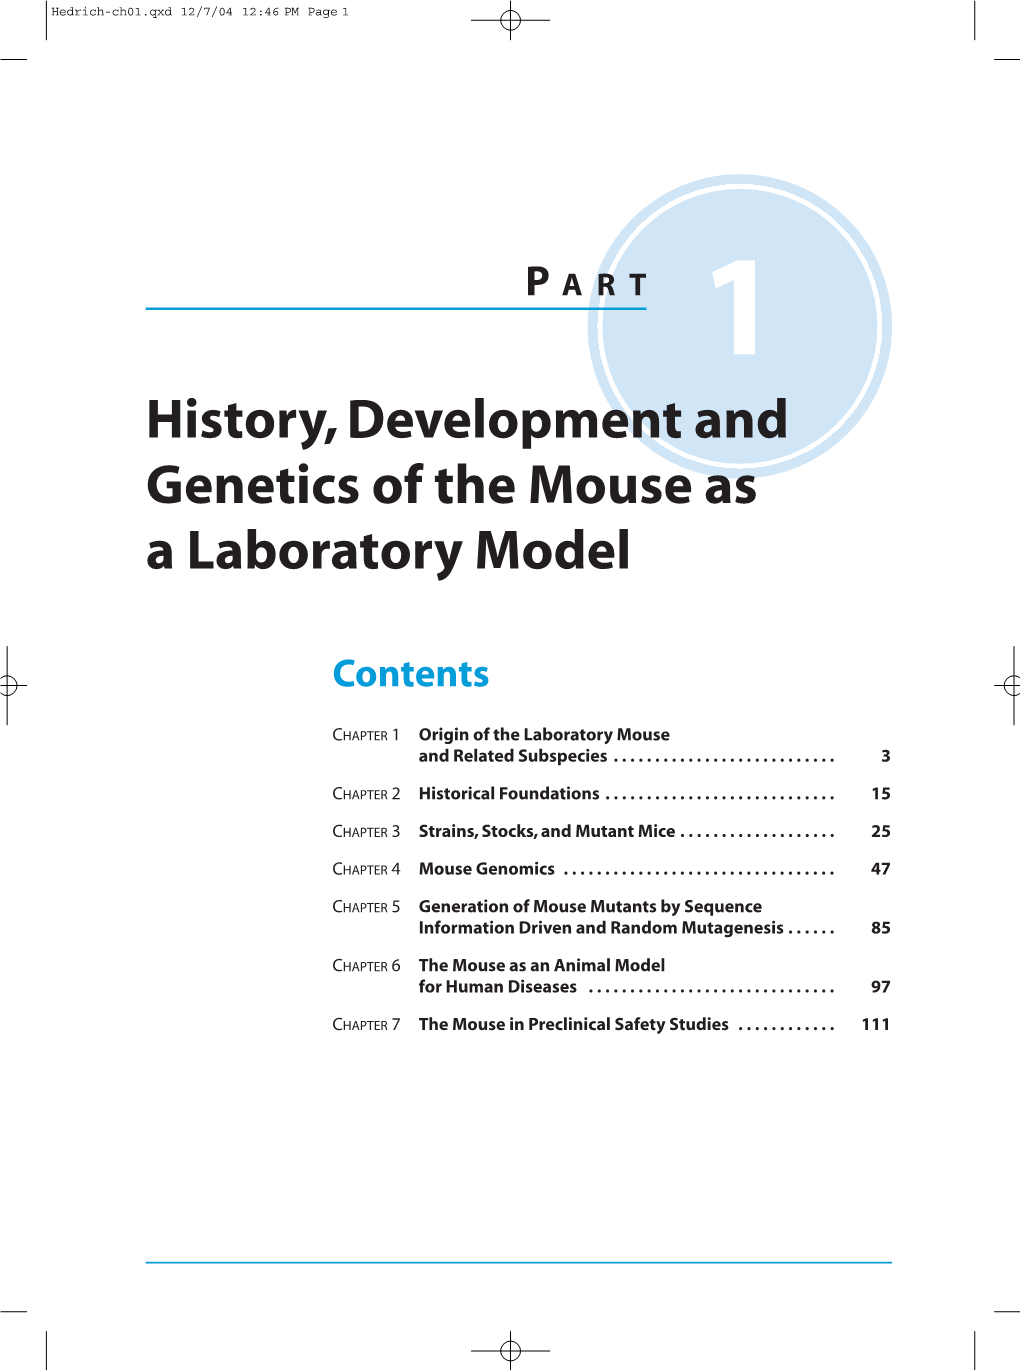 History, Development and Genetics of the Mouse As a Laboratory Model